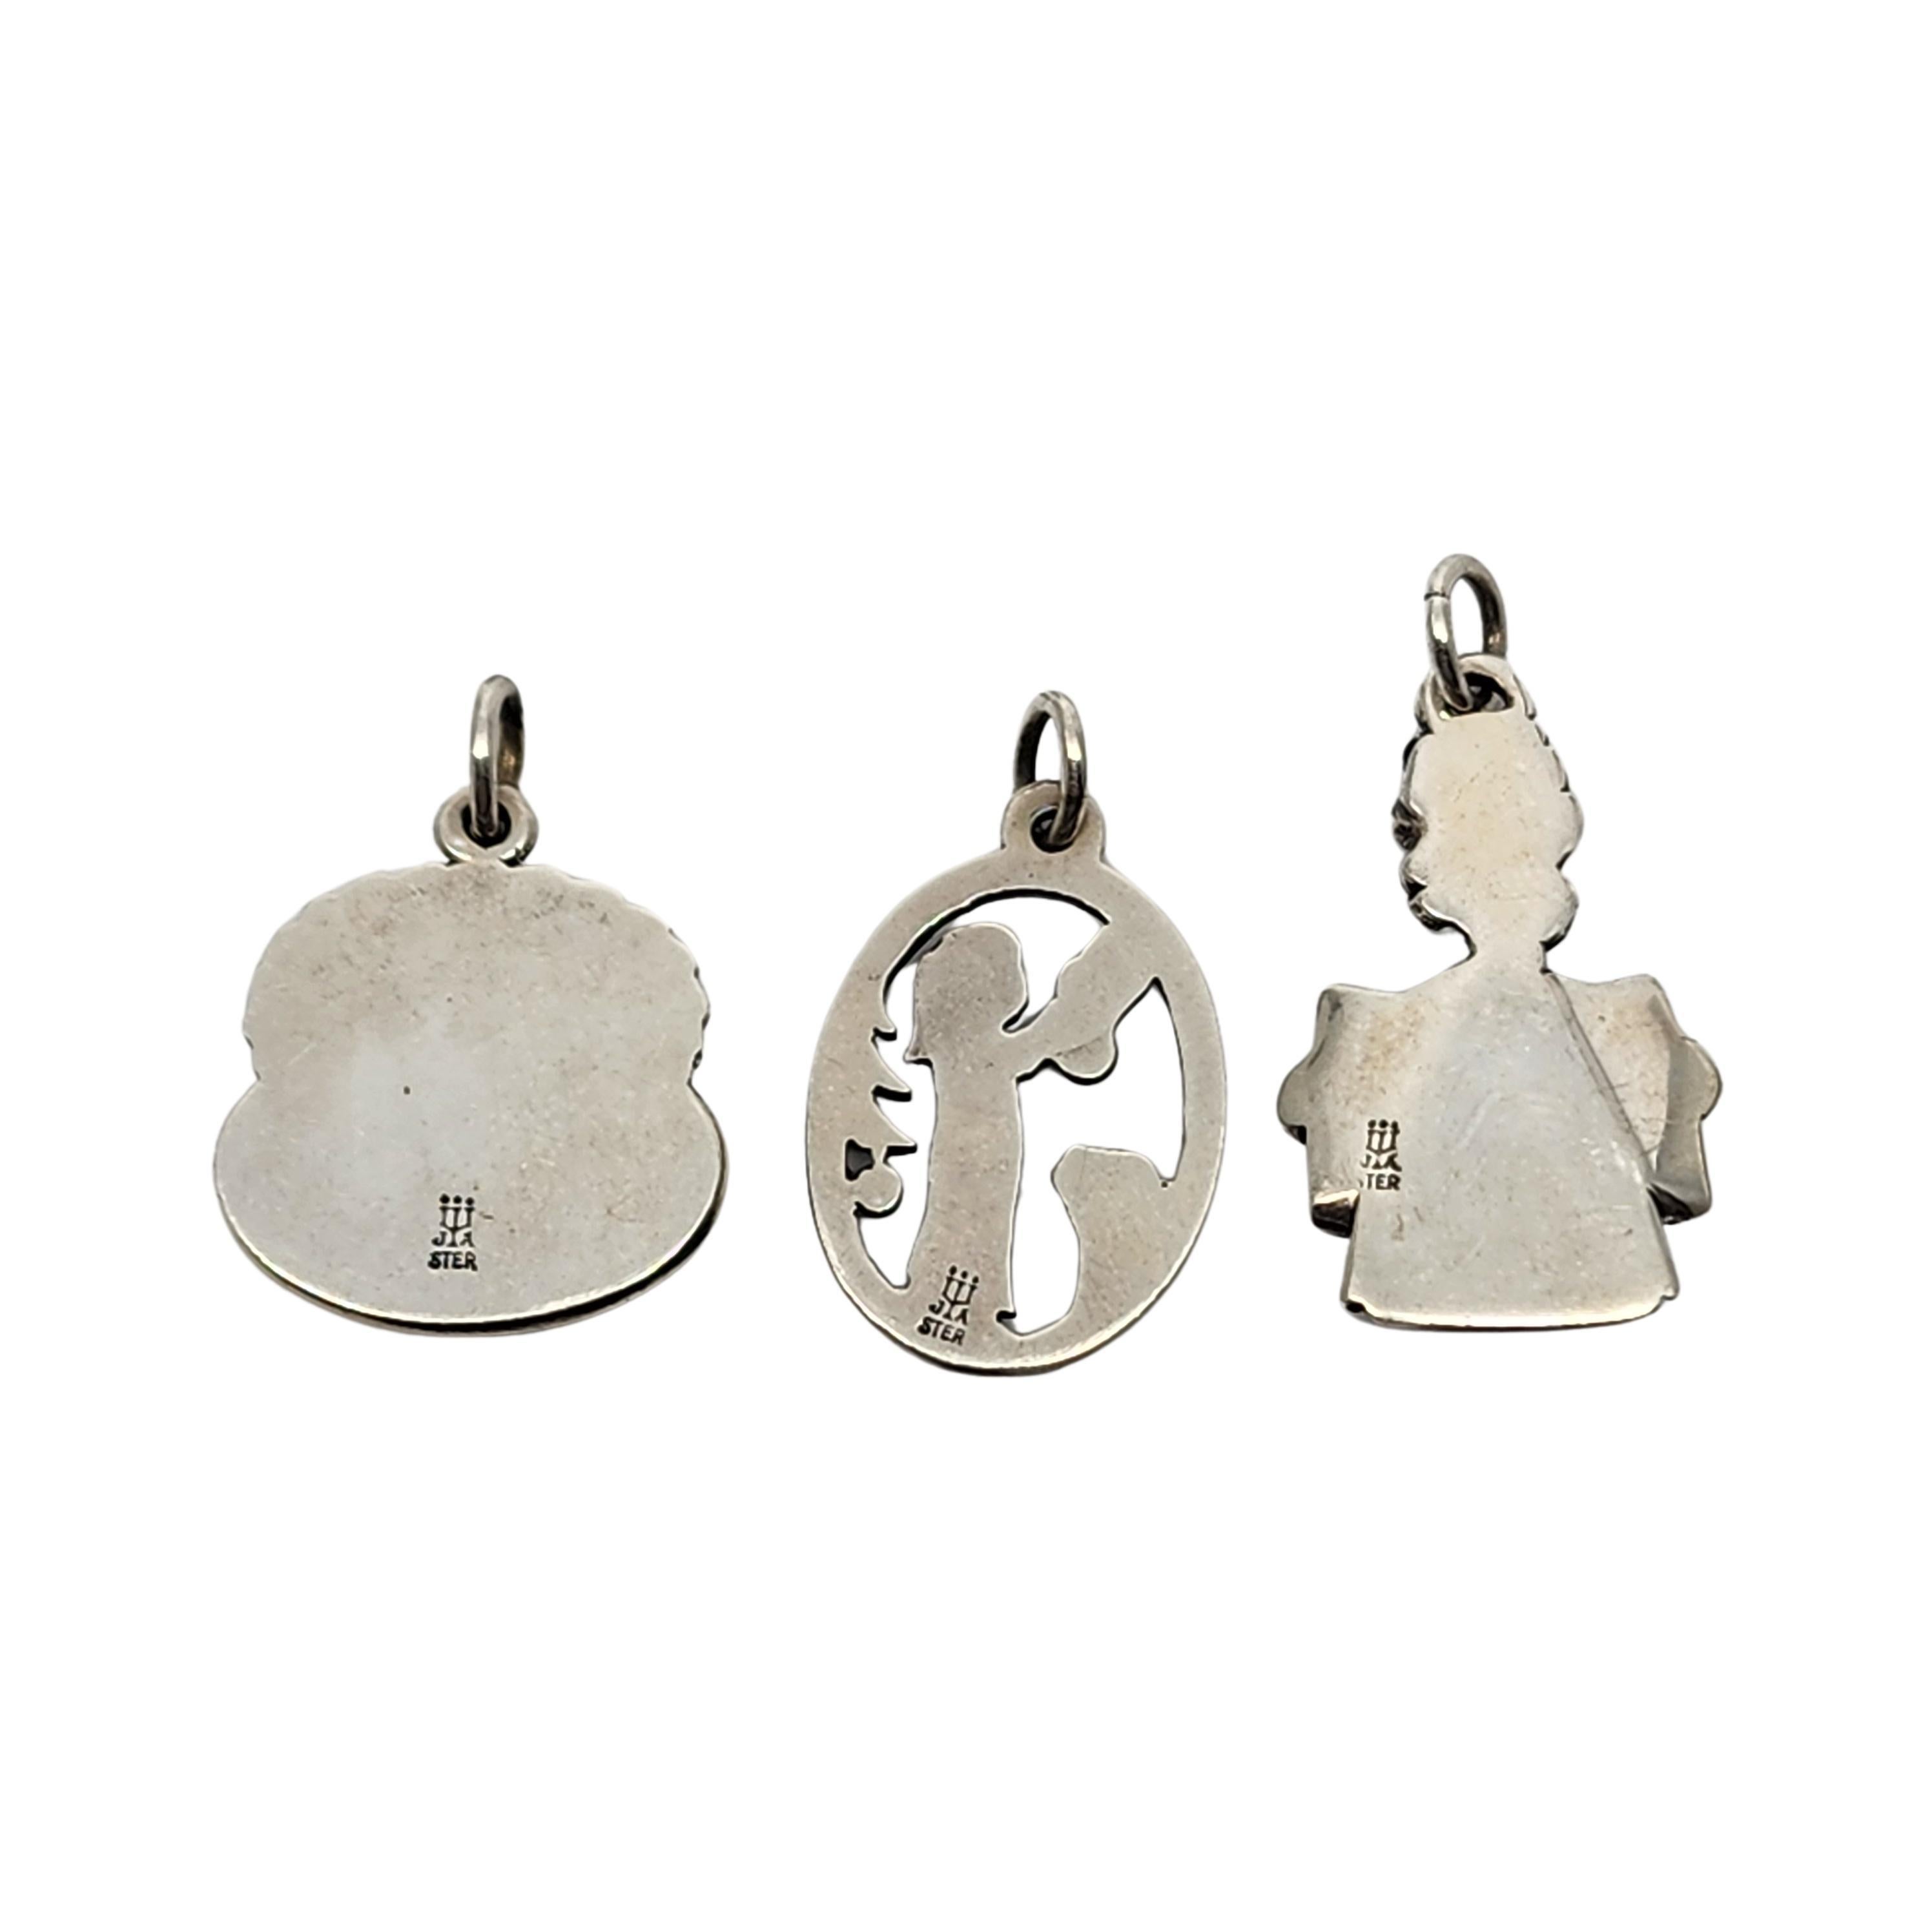 Set of 3 James Avery sterling silver charms/pendants.

This set of charms include a 